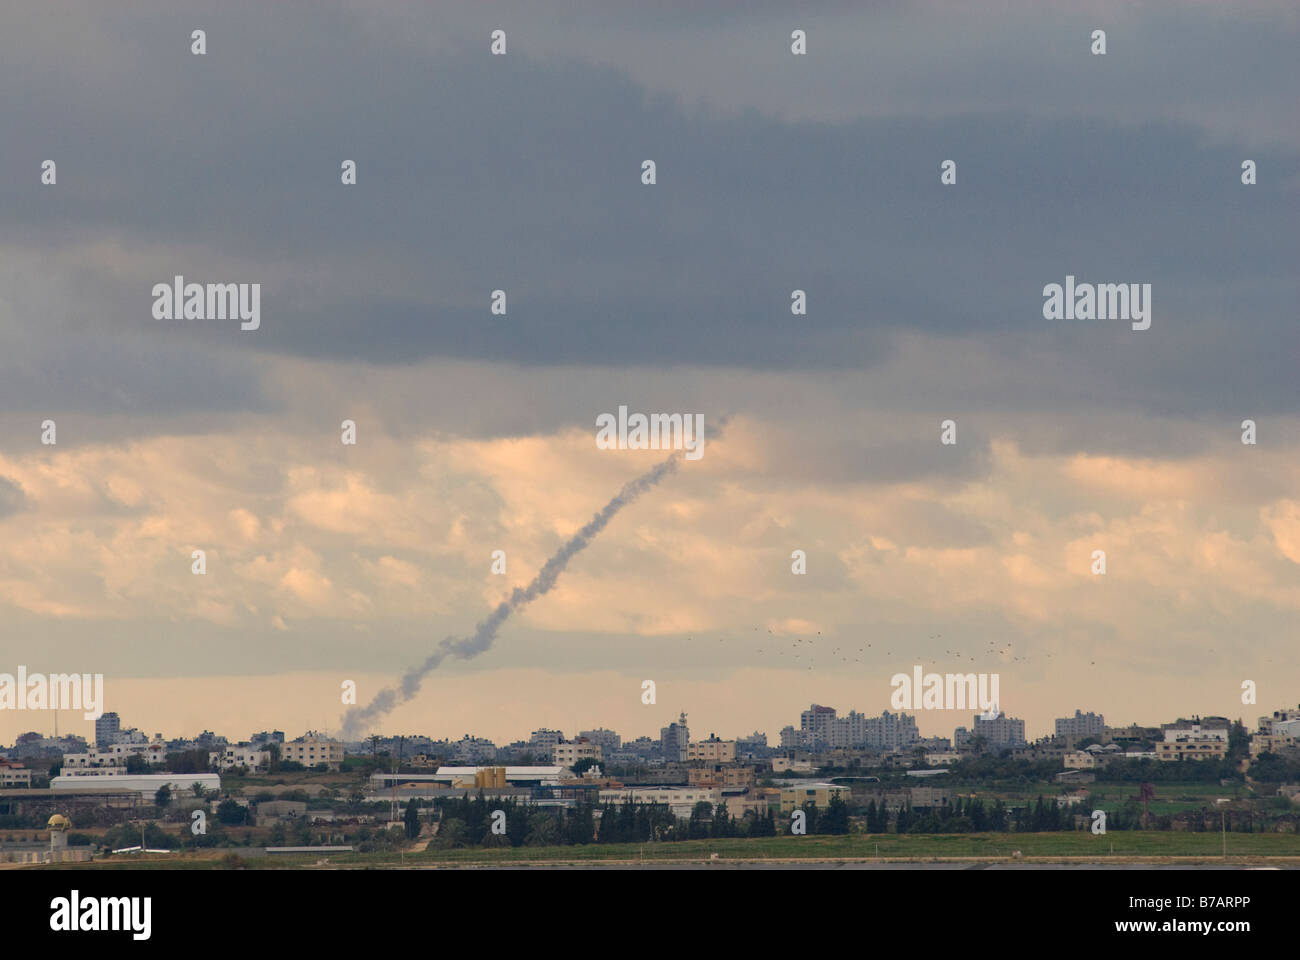 Smoke trail of a Grad rocket launched by Hamas from the Gaza Strip into Israel Stock Photo